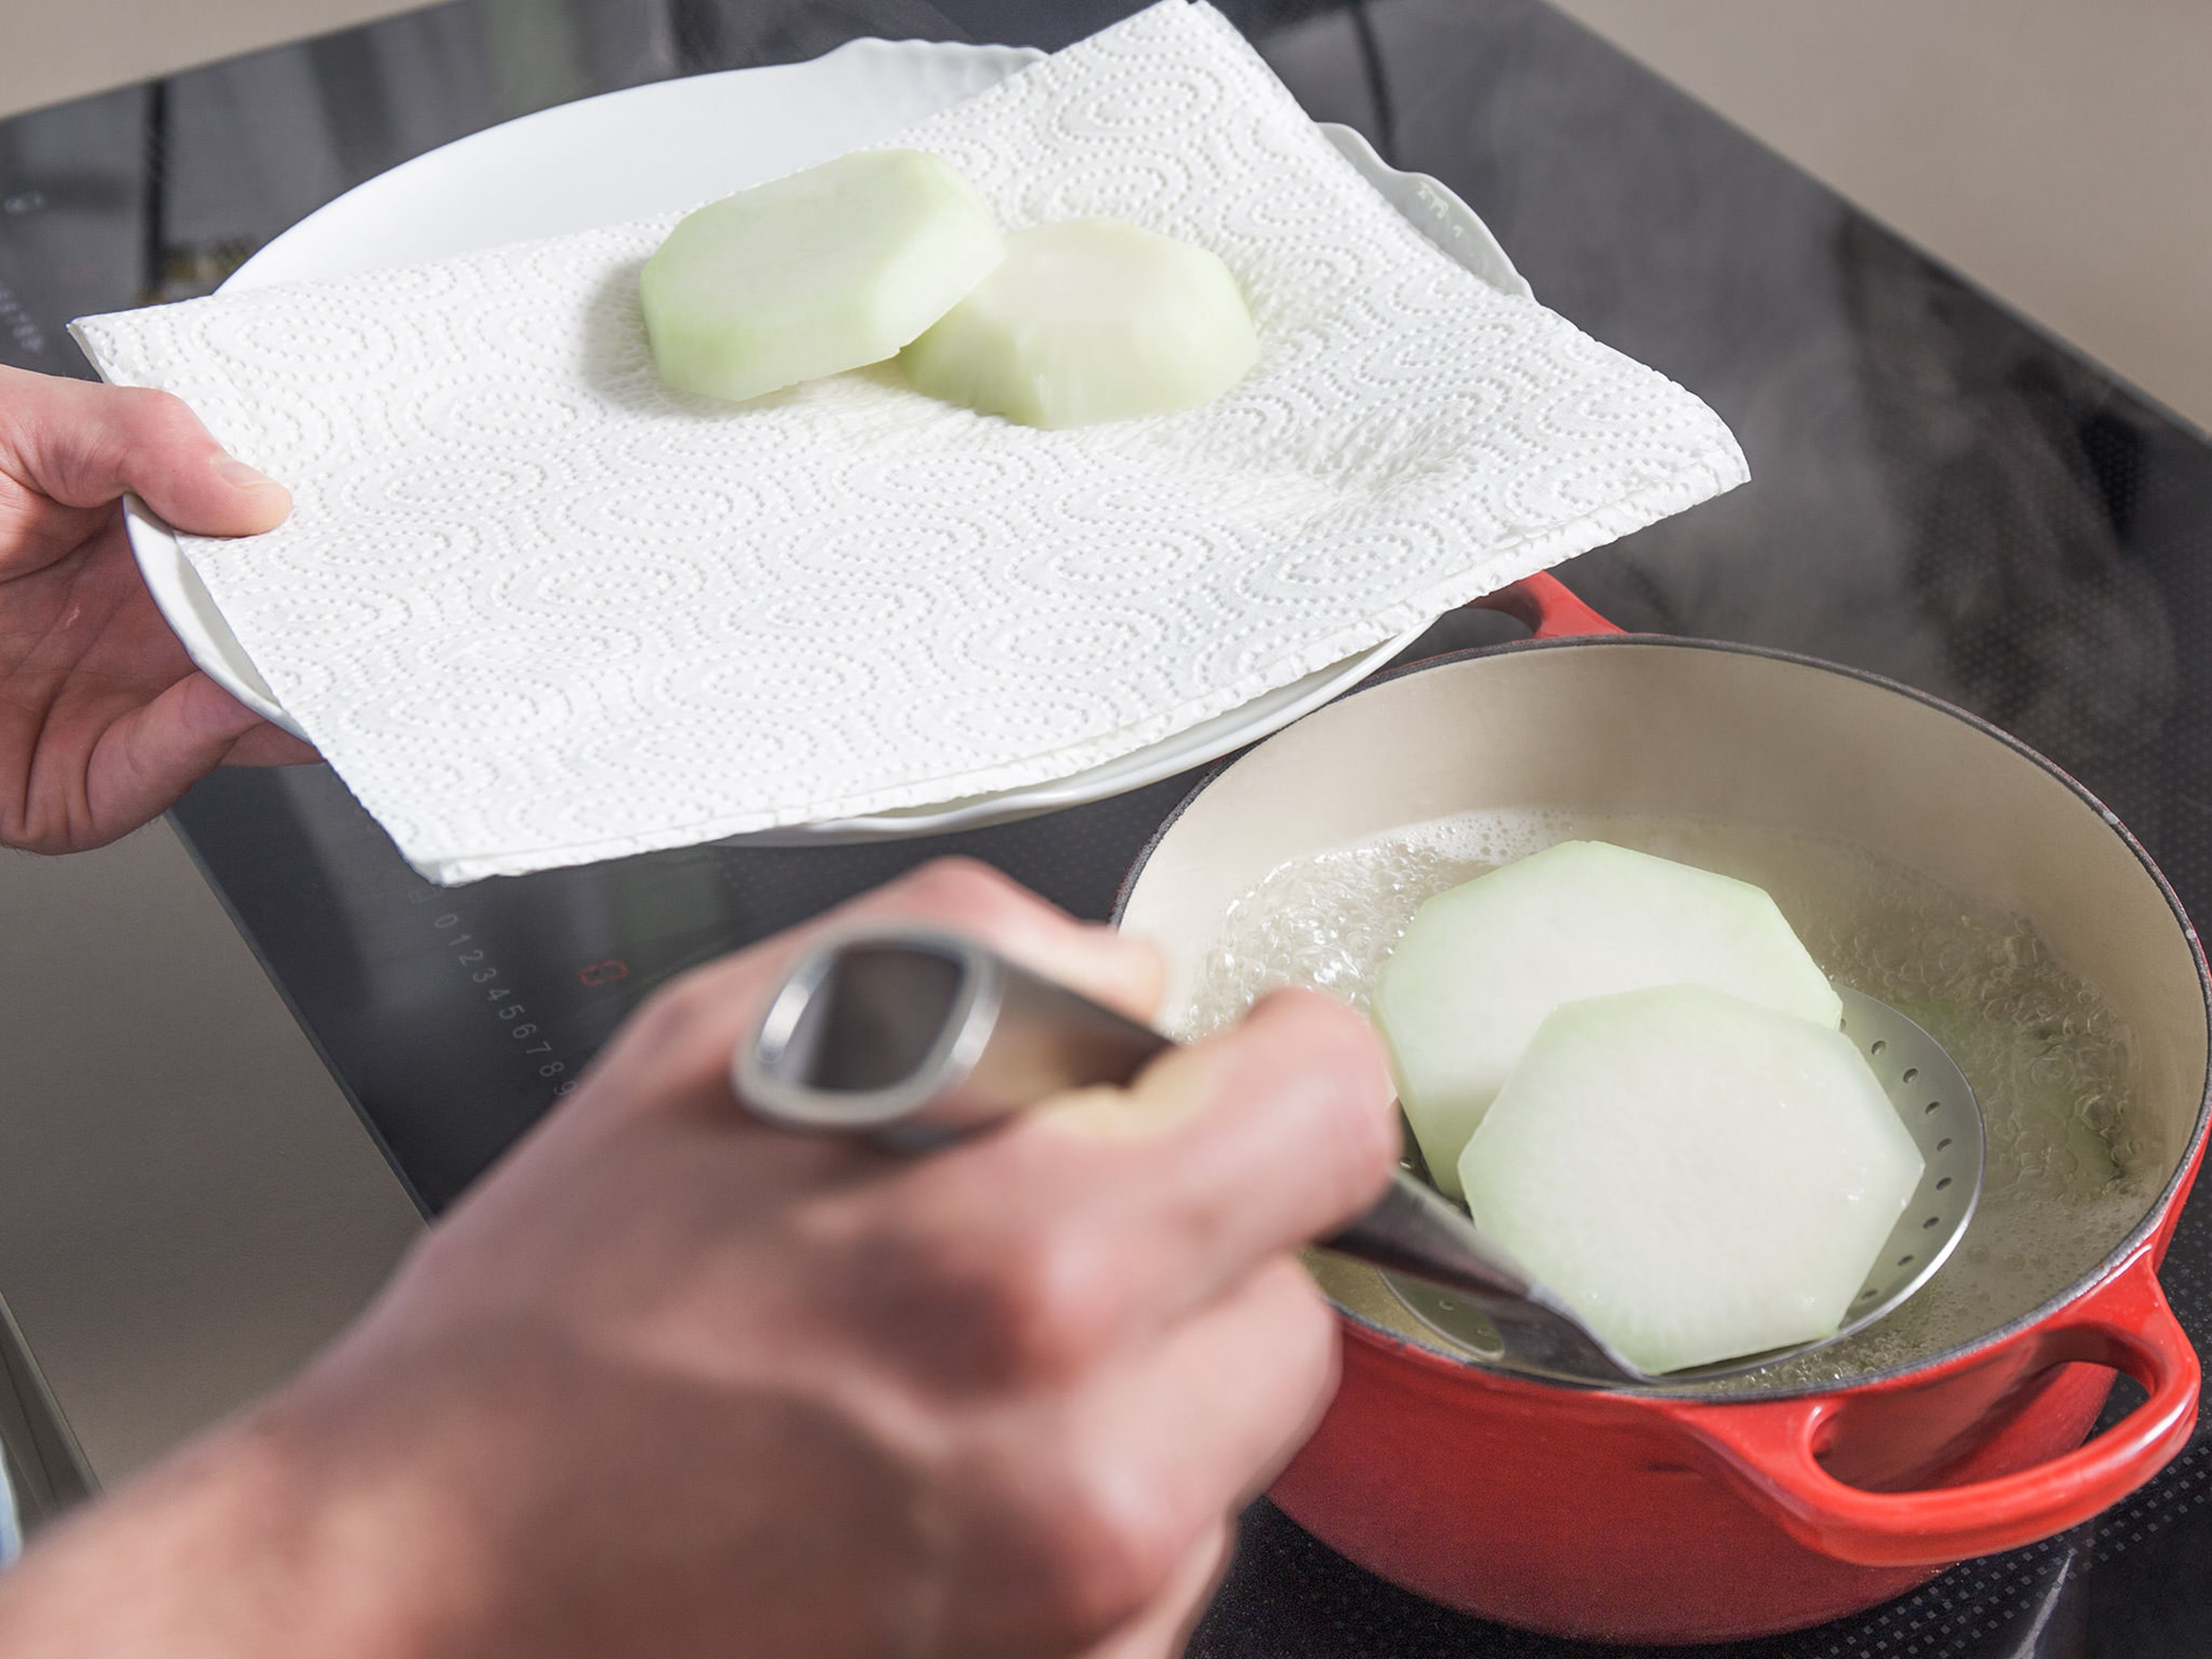 In a large pot of boiling water cook kohlrabi for approx. 5 – 6 min. Drain and transfer to a paper towel-lined plate to dry.